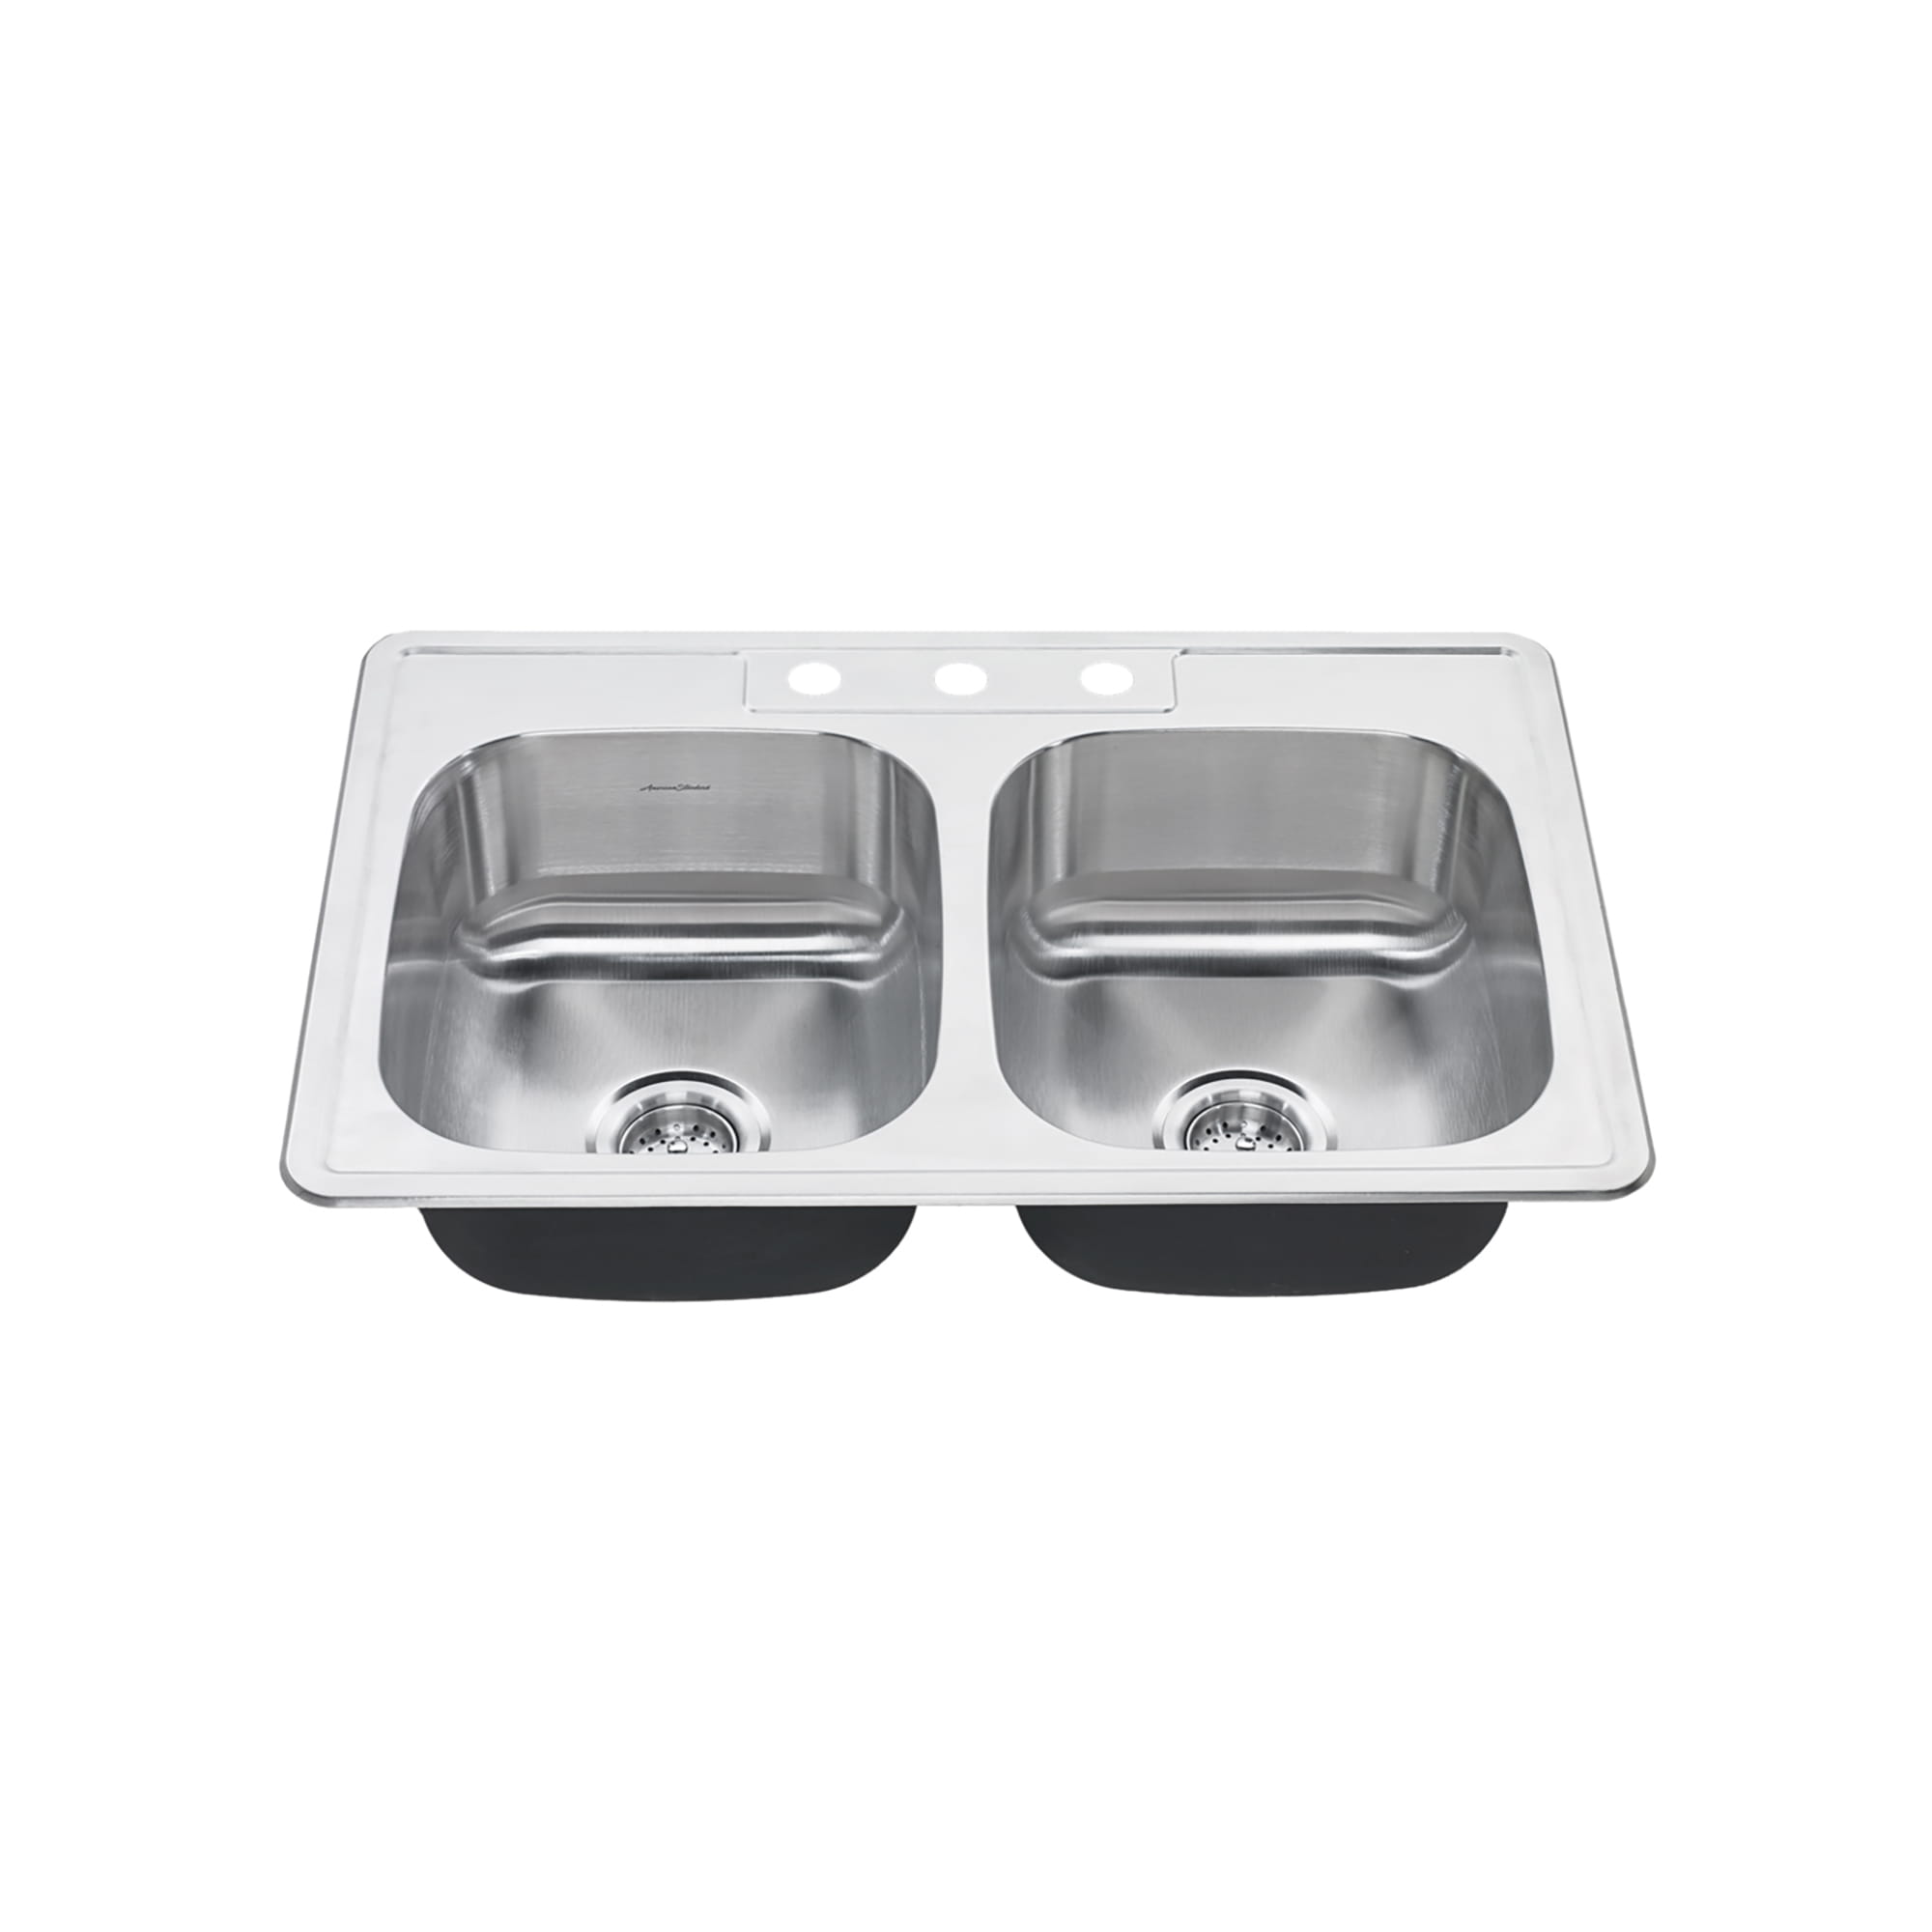 Colony™ 33 x 22-Inch Stainless Steel 3-Hole Top Mount Double-Bowl ADA Kitchen Sink